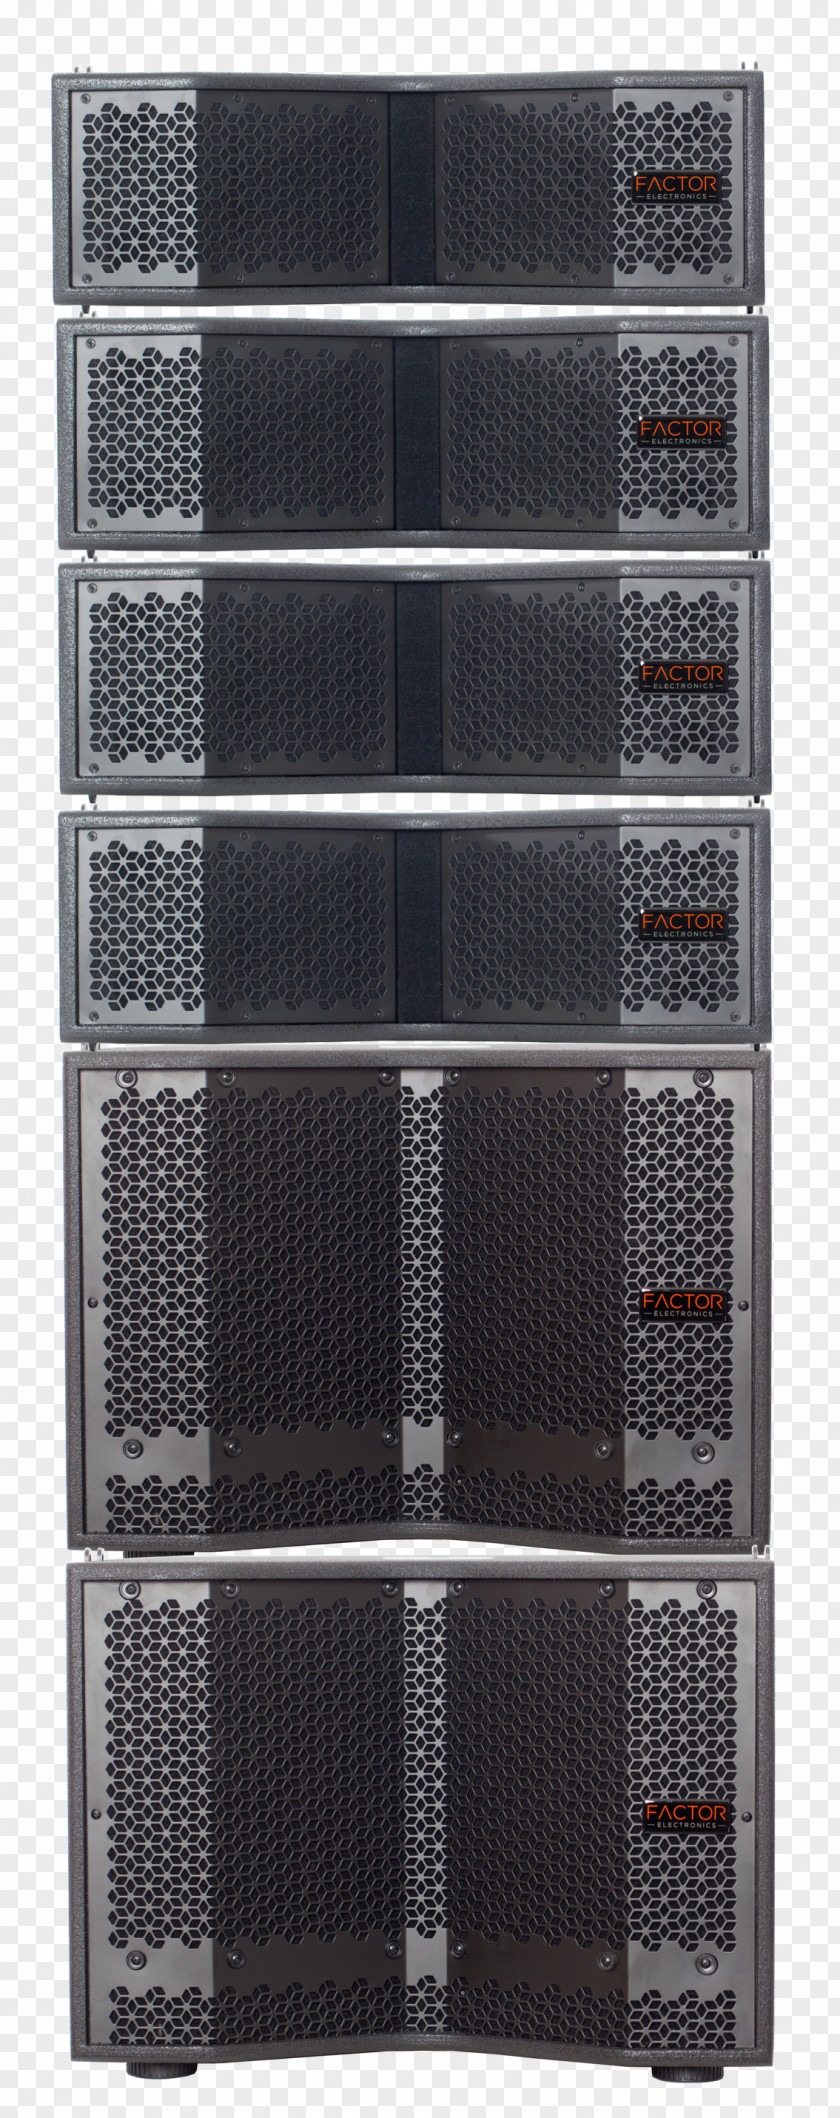 Computer Cases & Housings Disk Array Servers Cluster PNG